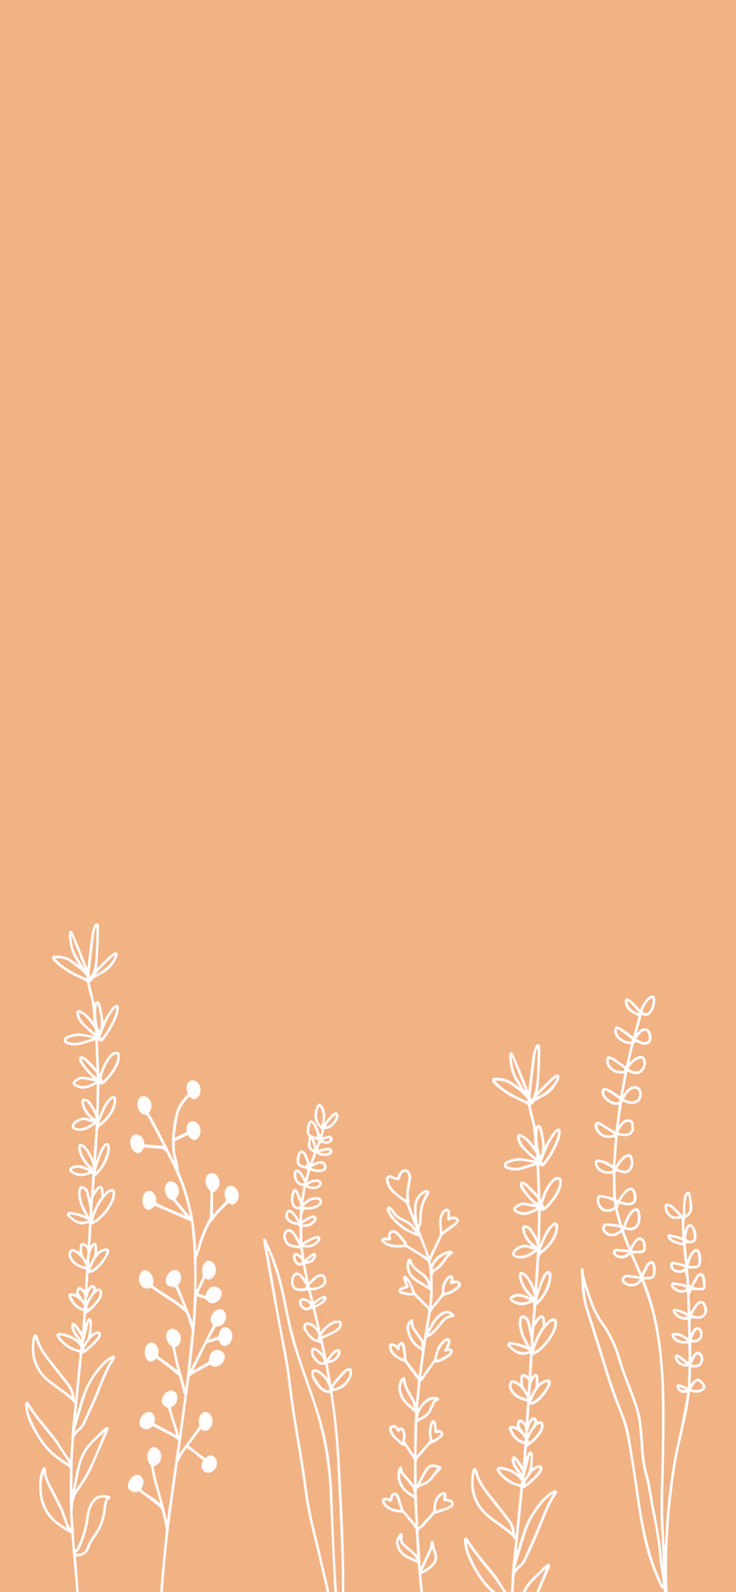 Free Aesthetically Pleasing Pink Floral Phone Wallpapers By Illustrator